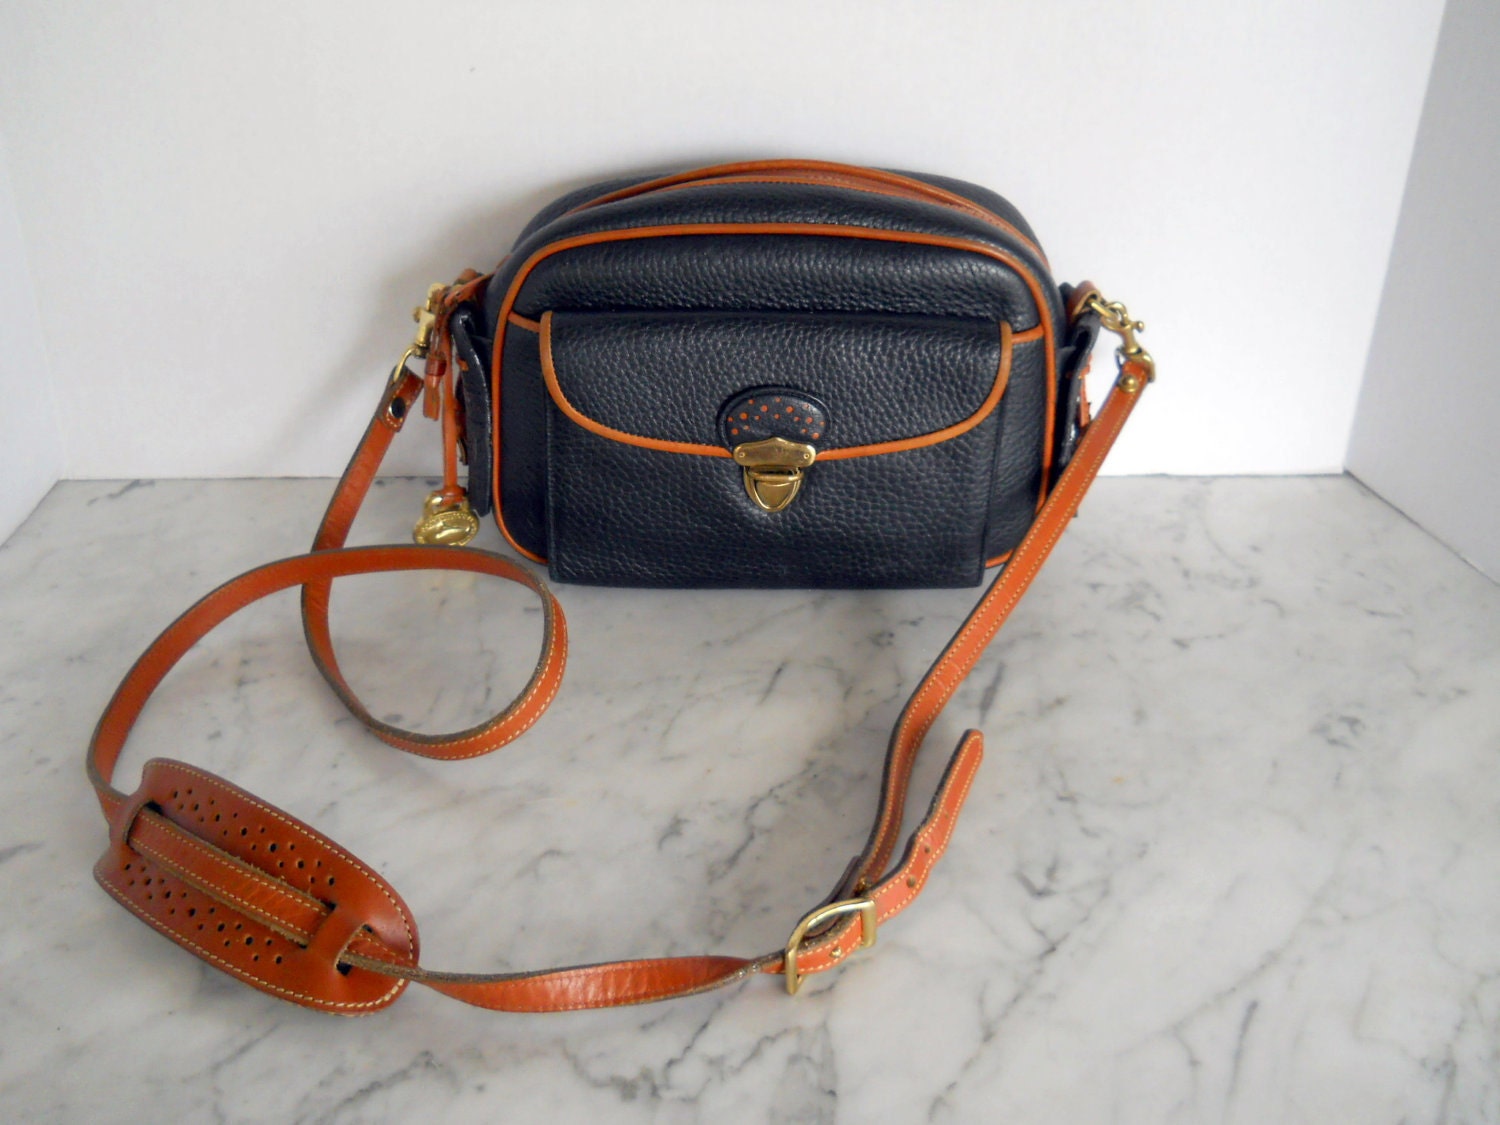 Dooney and Bourke Cross Body Bag // Kilty by pearlsvintage on Etsy